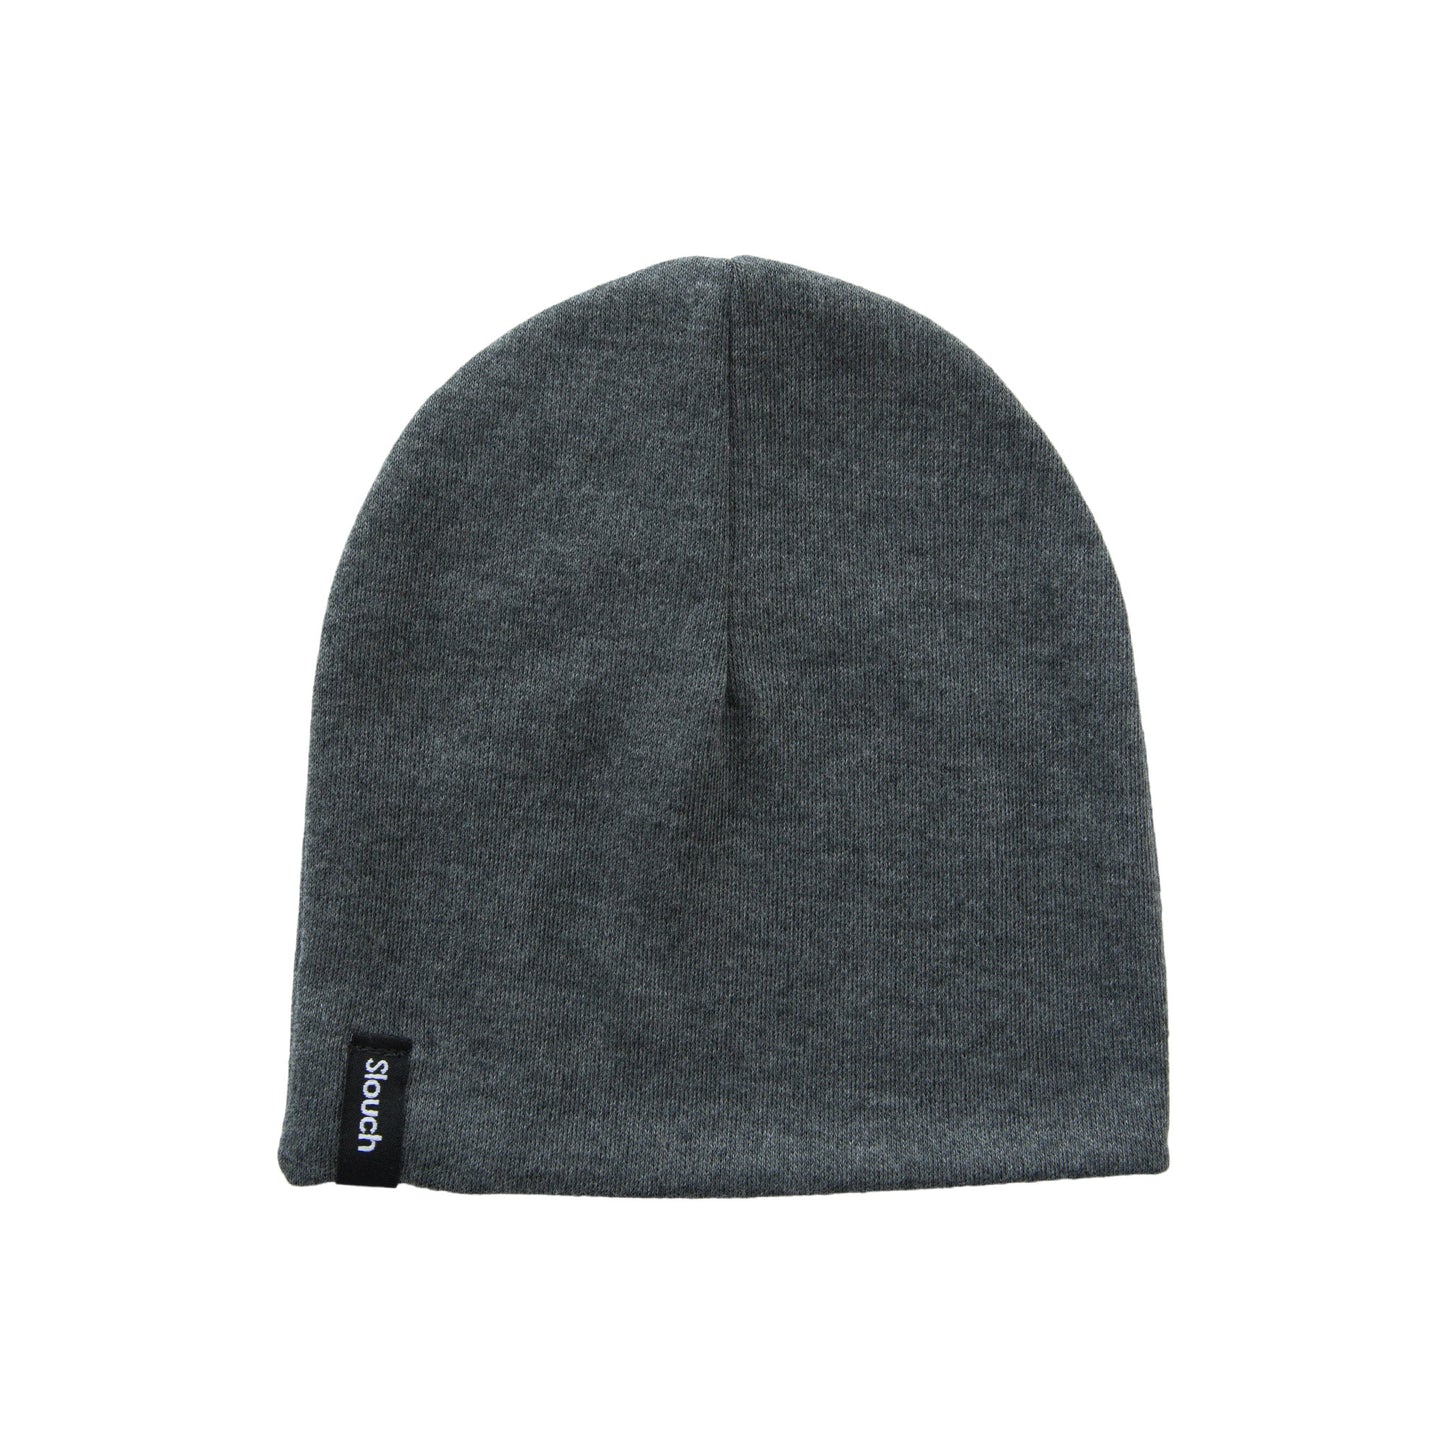 Charcoal Slouch Beanie